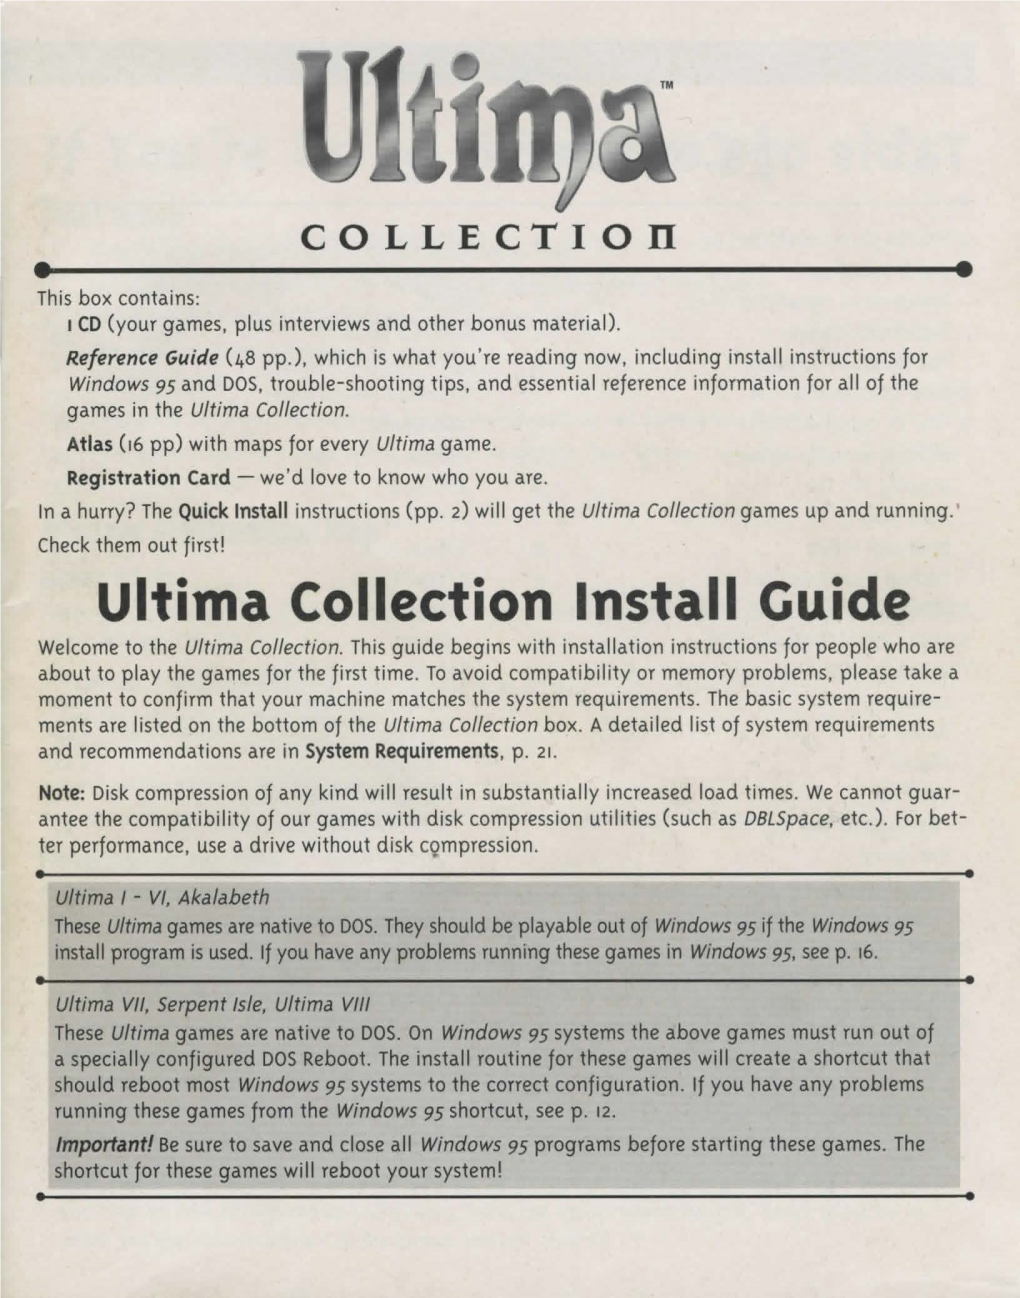 Ultima Collection Install Guide Welcome to the U/Tima Collection